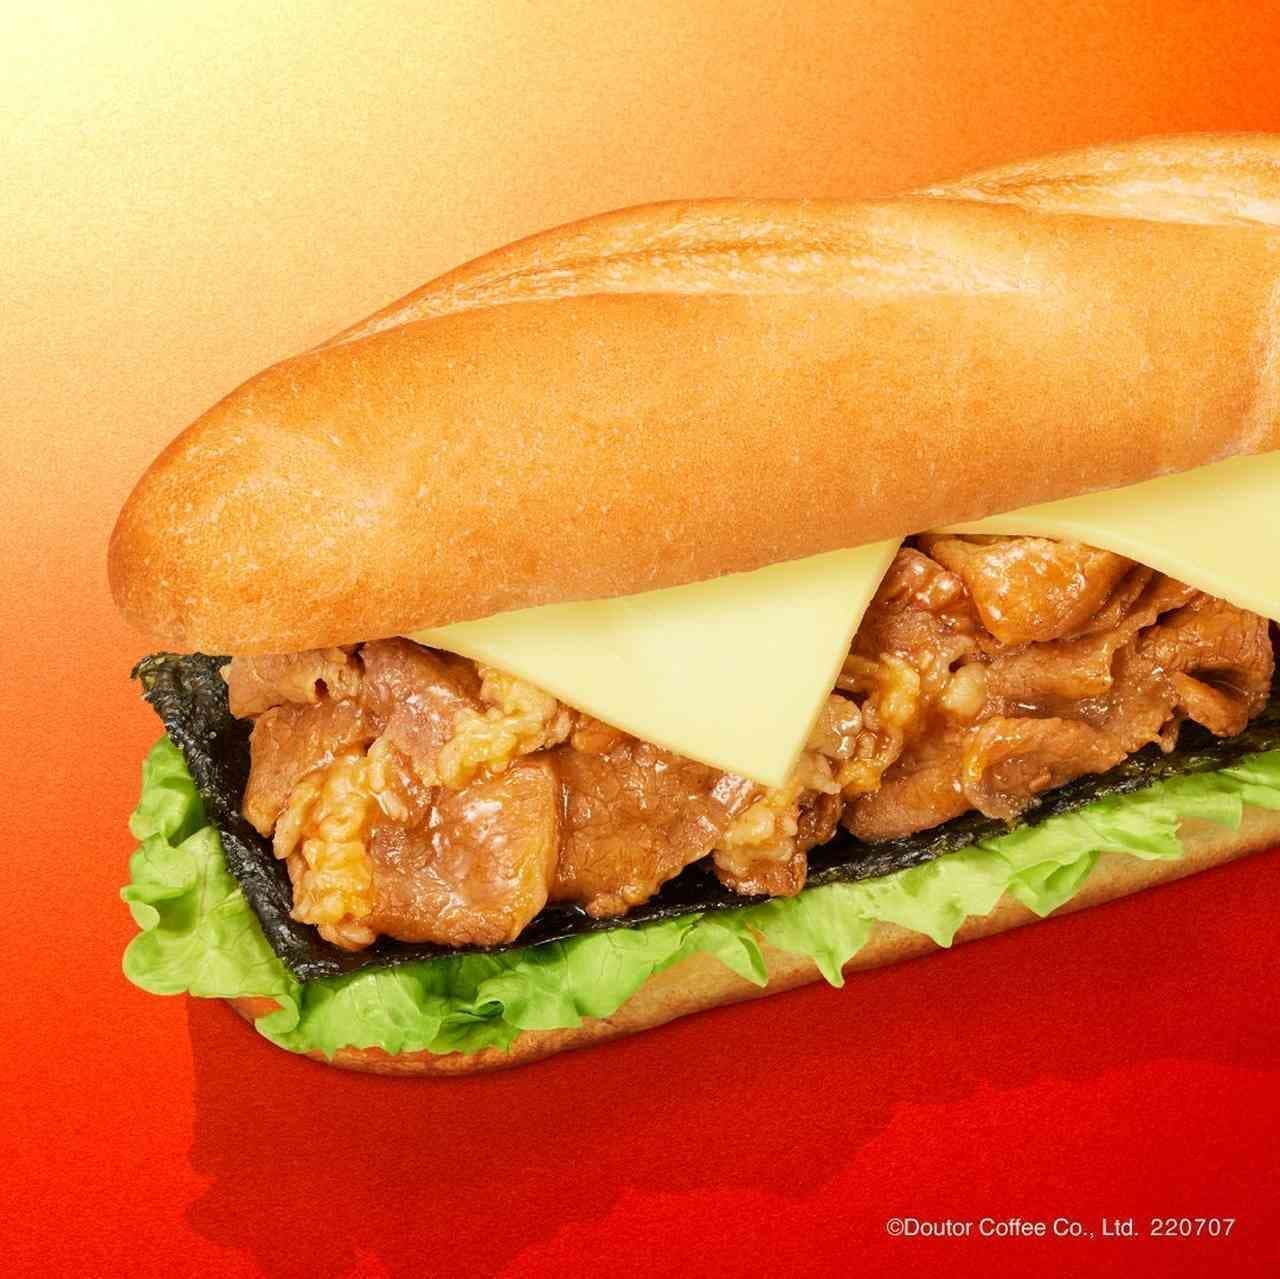 Doutor "Limited Time Milano Sandwich - Beef Kalbi Cheese".